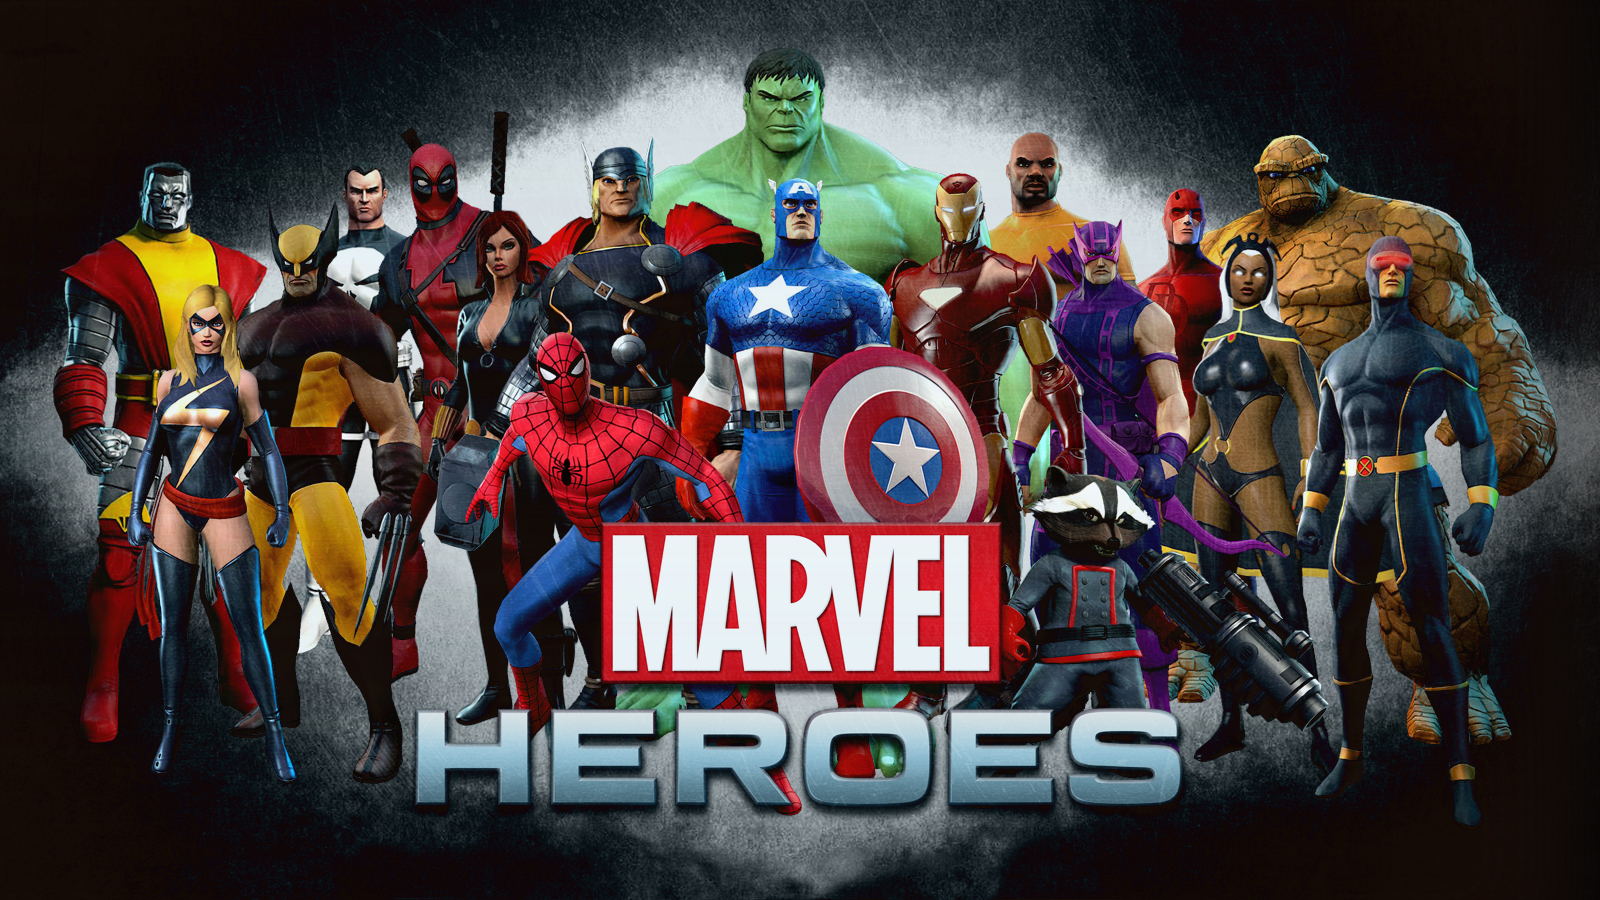 Marvel Heroes Wallpaper By Squiddytron